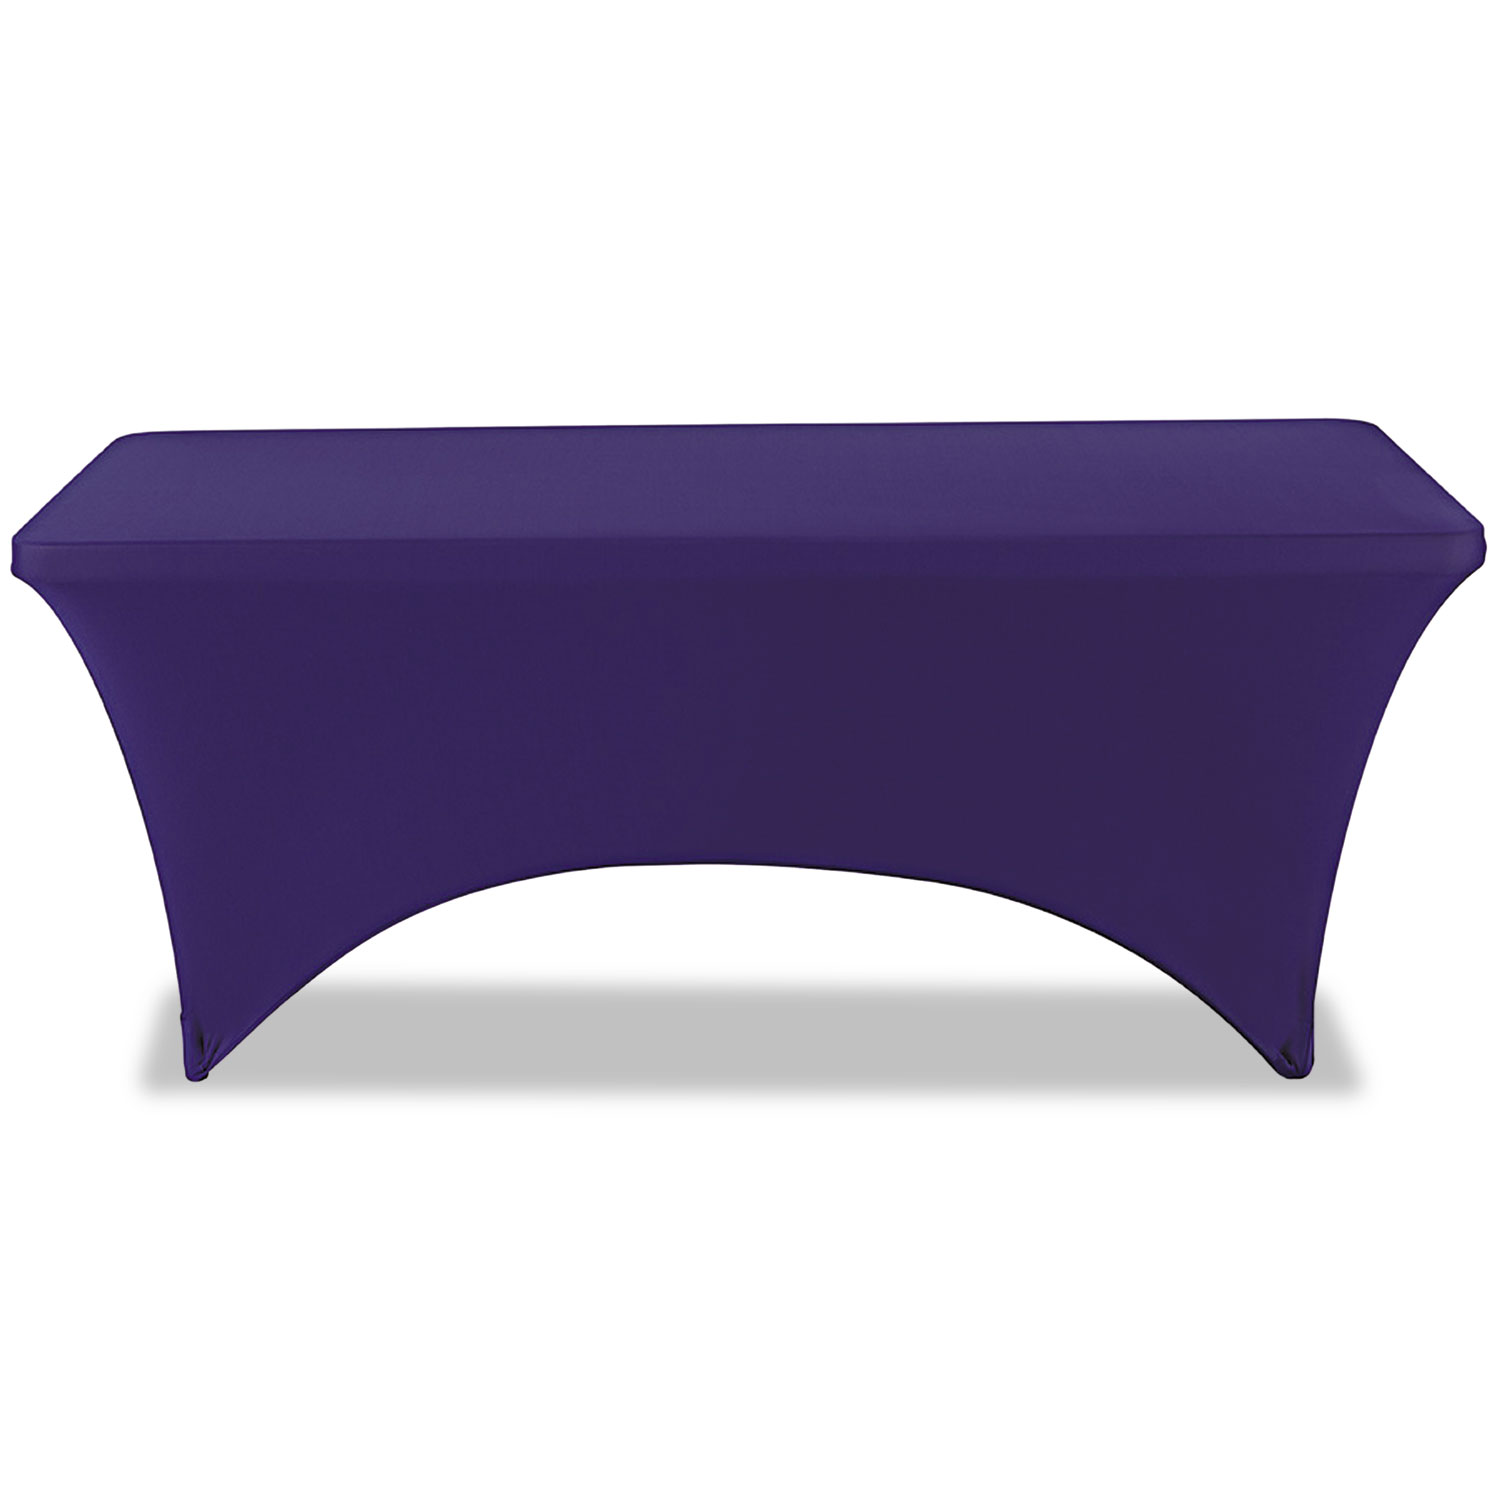  Iceberg 16526 Stretch-Fabric Table Cover, Polyester/Spandex, 30 x 72, Blue (ICE16526) 